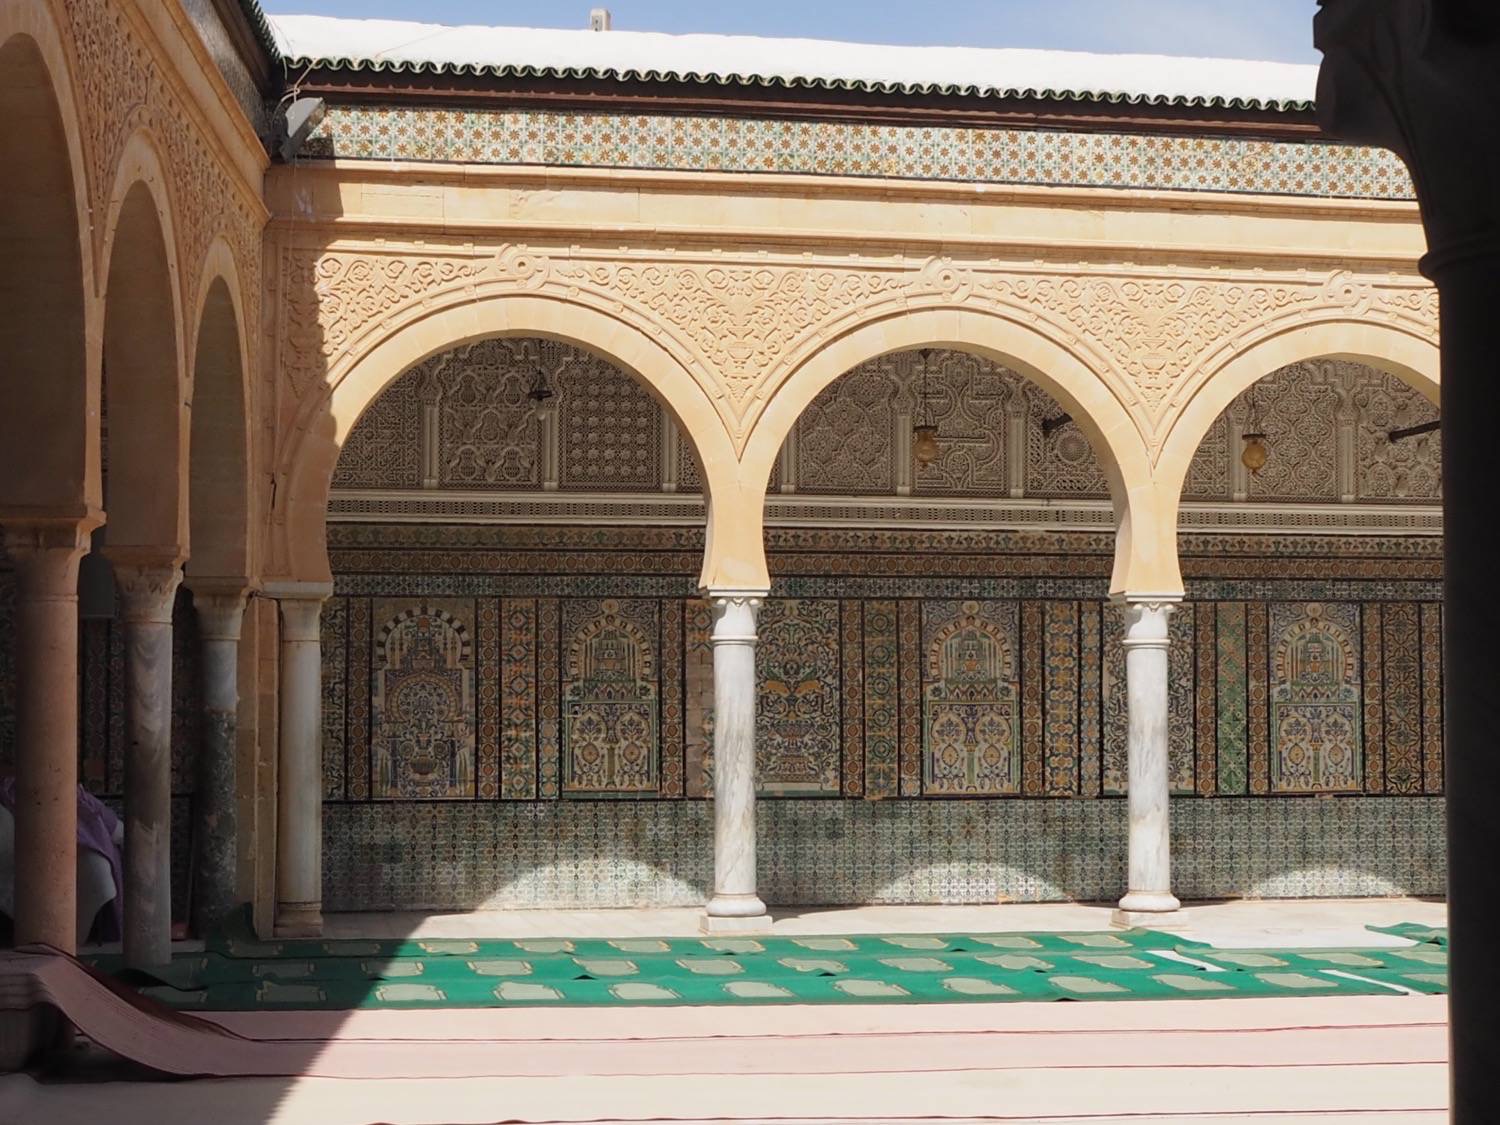 Detail view of stucco and tile decorations in a corner of the zawiya courtyard